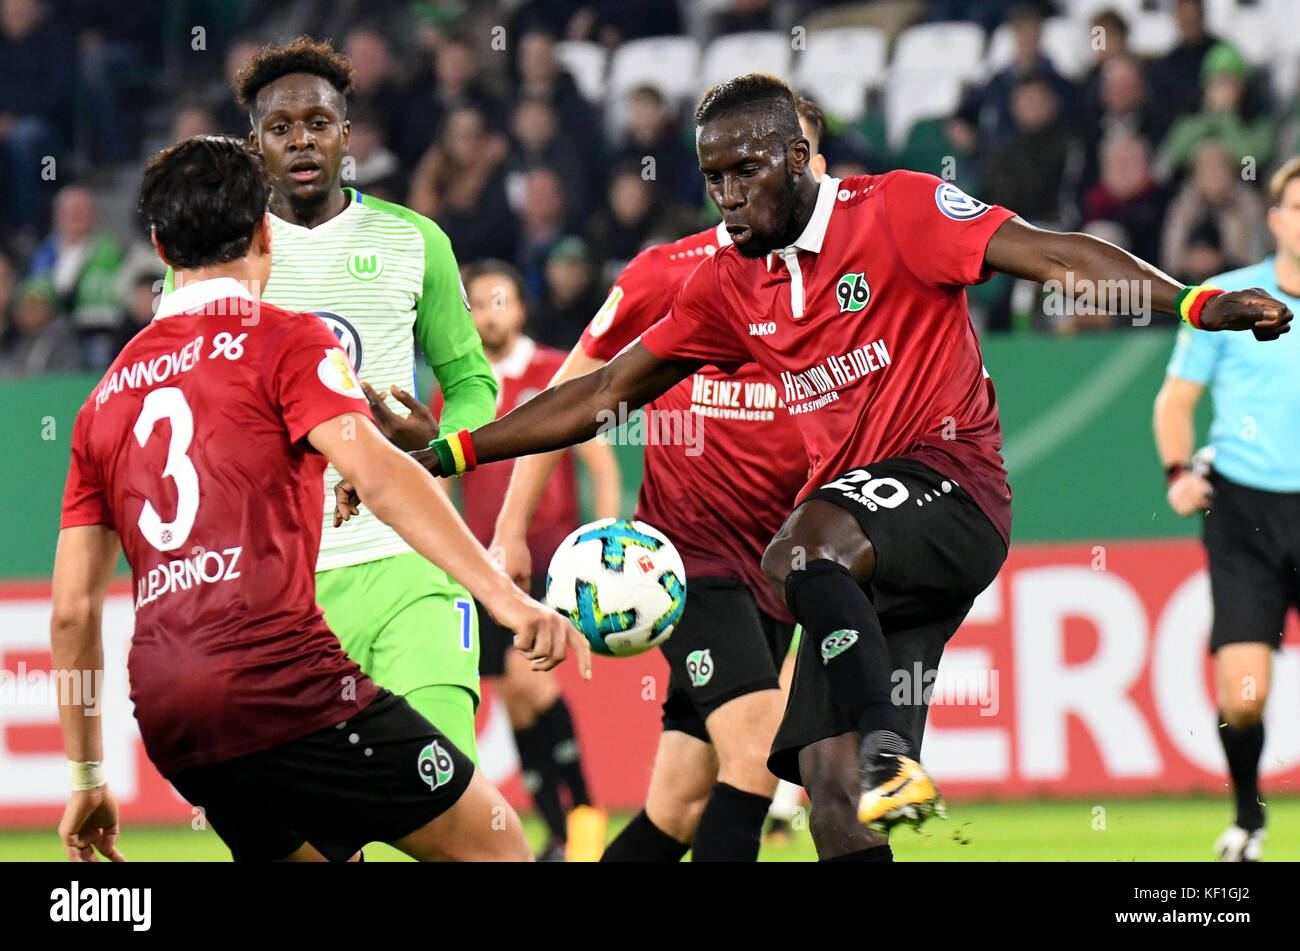 Wolfsburg's Divock Origi (2nd from left) vying for the ball against Hannover's Miiko Albornoz (L) and Salif Sane during the DFB Cup soccer match between VfL Wolfsburg and Hannover 96 in the Volkswagen Arena in Wolfsburg, Germany, 25 October 2017. (EMBARGO CONDITIONS - ATTENTION: The DFB prohibits the utilisation and publication of sequential pictures on the internet and other online media during the match (including half-time). ATTENTION: BLOCKING PERIOD! The DFB permits the further utilisation and publication of the pictures for mobile services (especially MMS) and for DVB-H and DMB only a Stock Photo